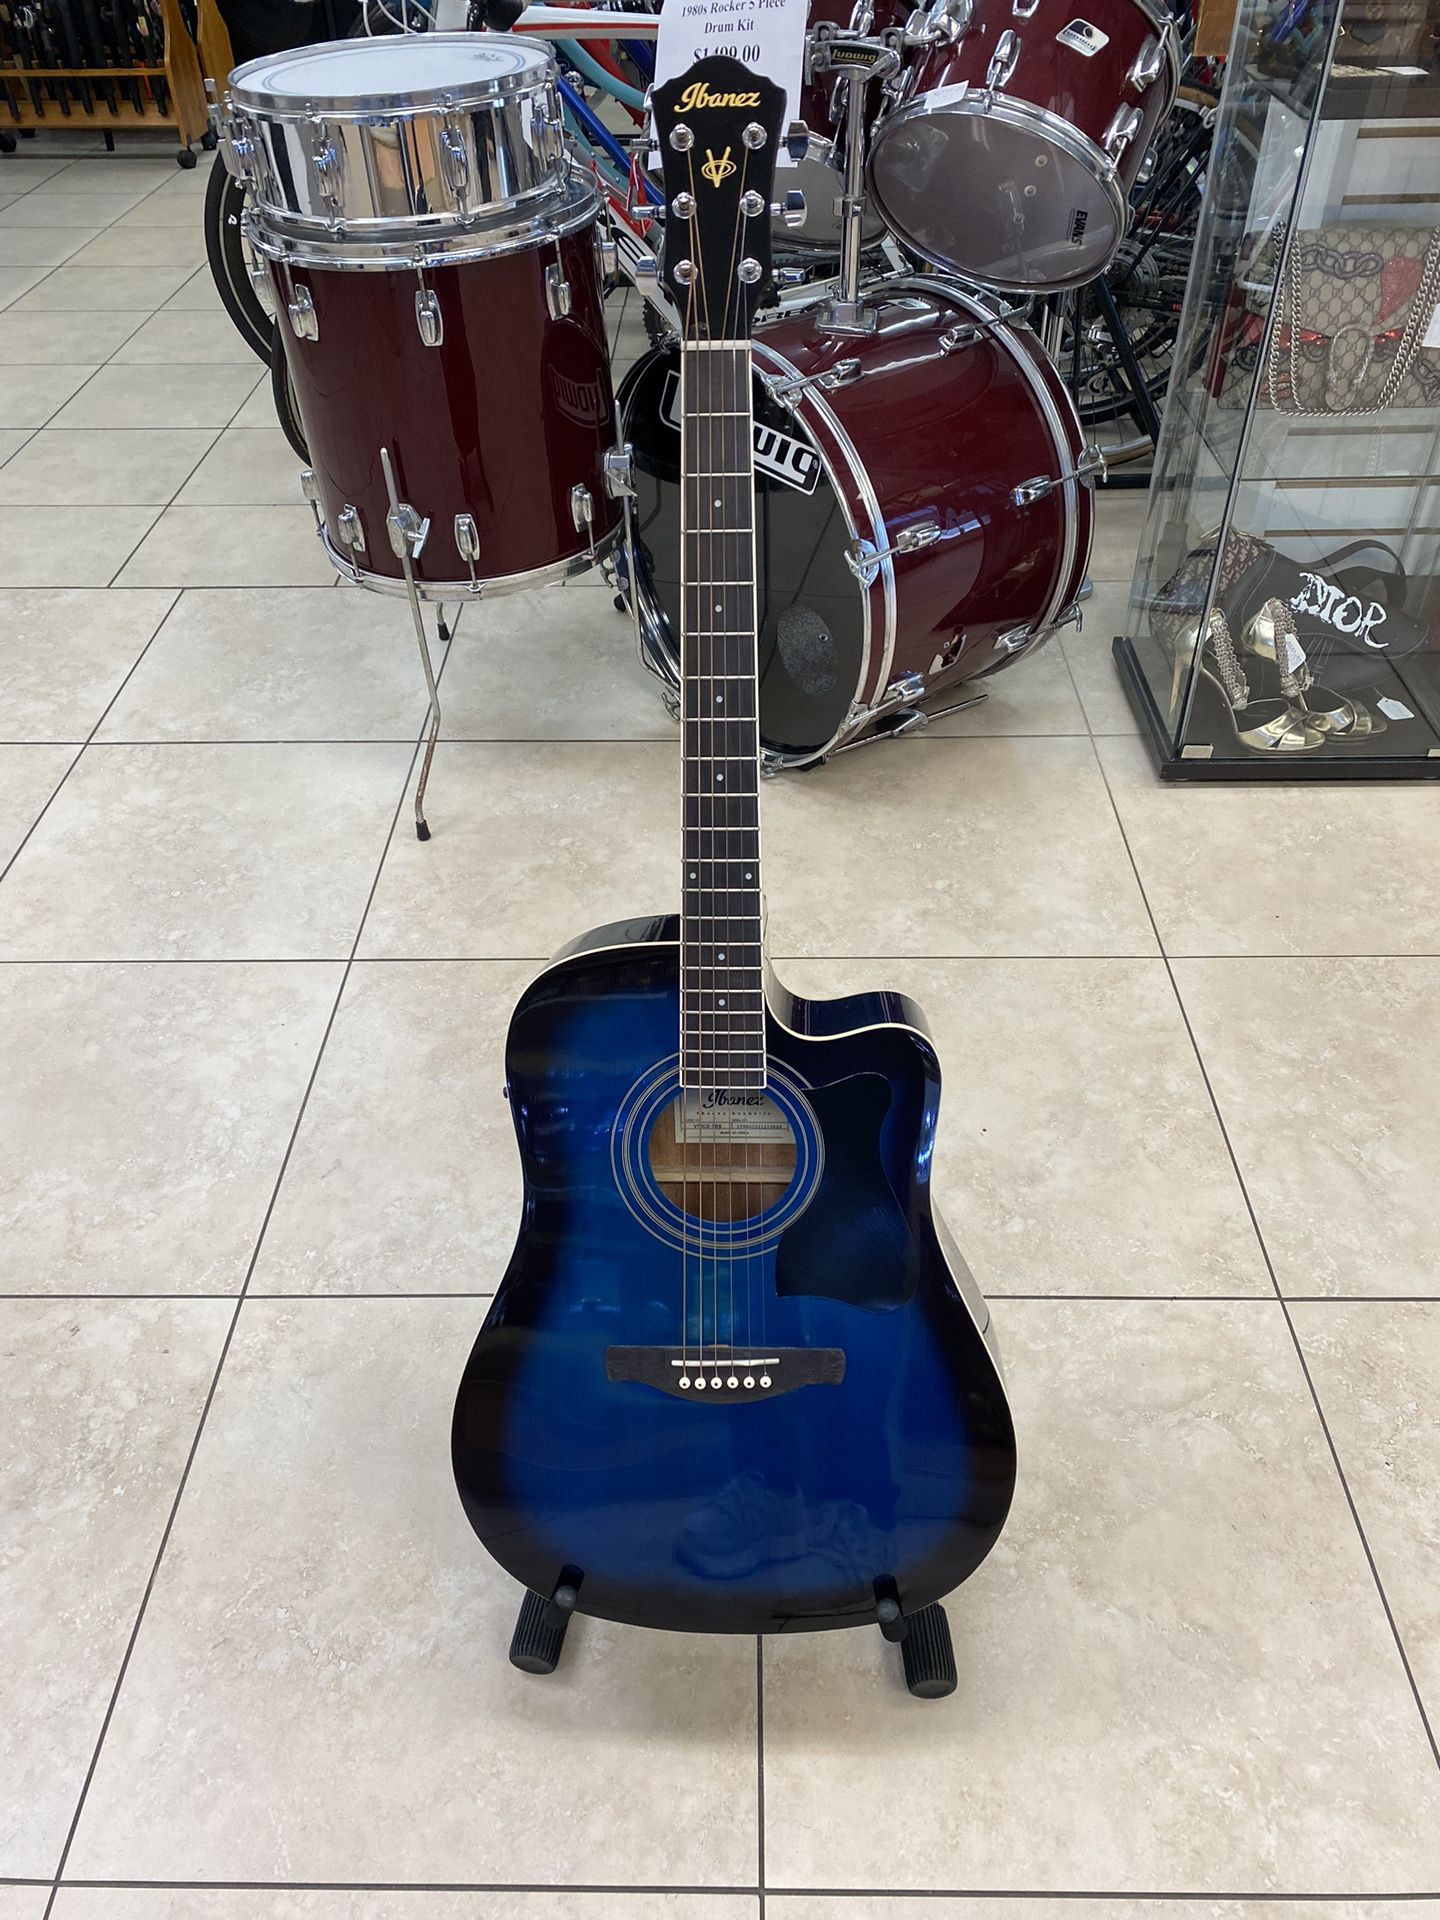 Ibanez V70CE-TBS Blue Right Hand Acoustic Electric Guitar 